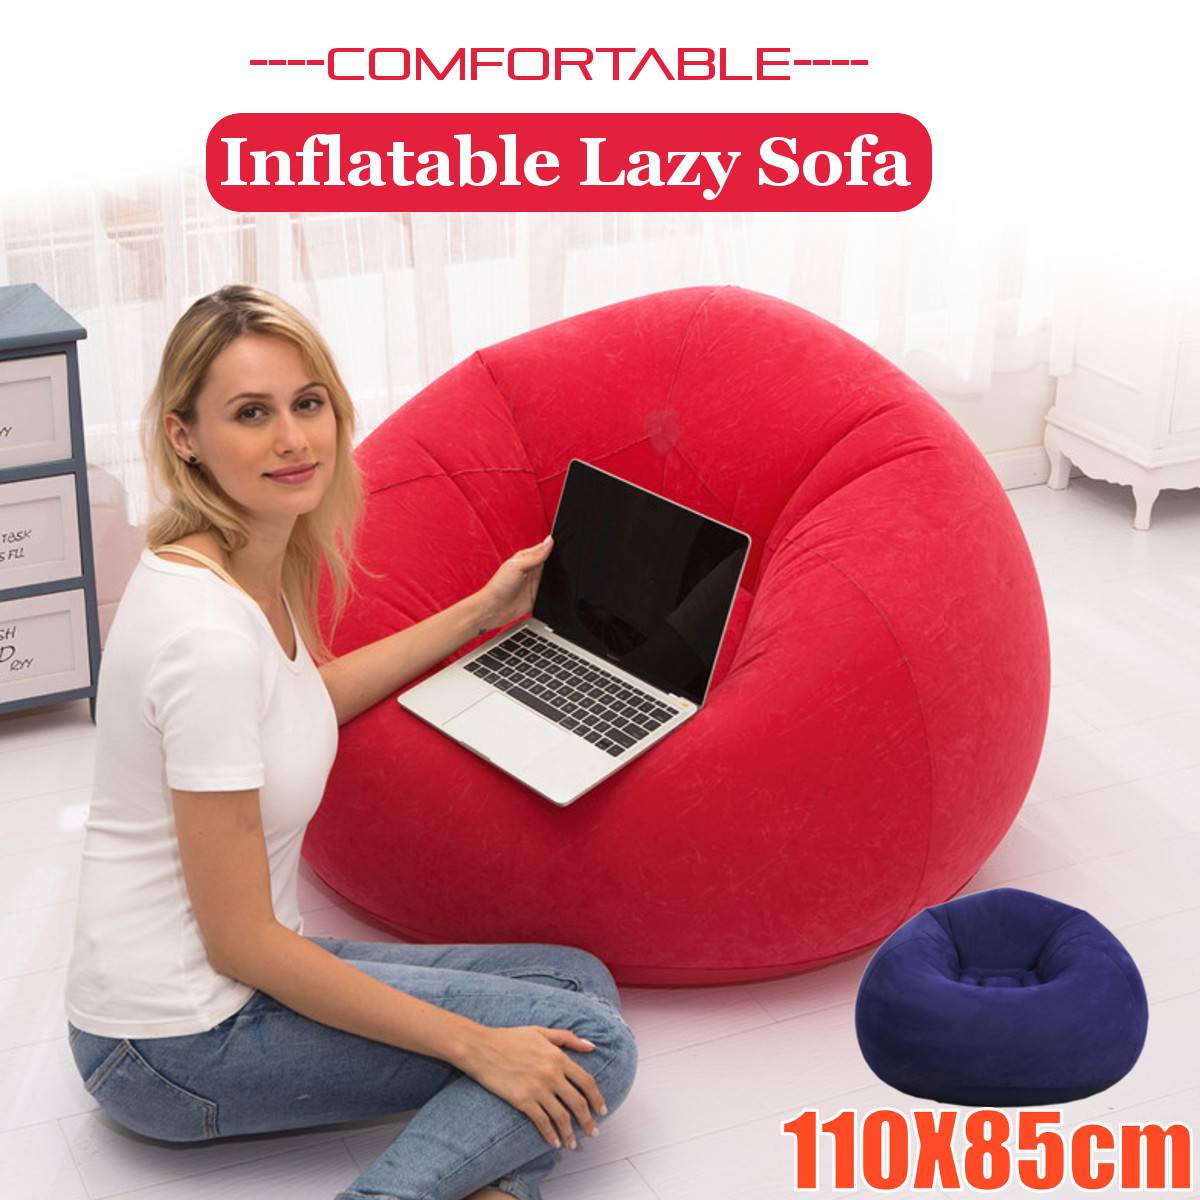 110x85cm-Large-Inflatable-Chair-Bean-Bag-PVC-IndoorOutdoor-Garden-Furniture-Lounge-Adult-Lazy-Sofa-N-1682288-2